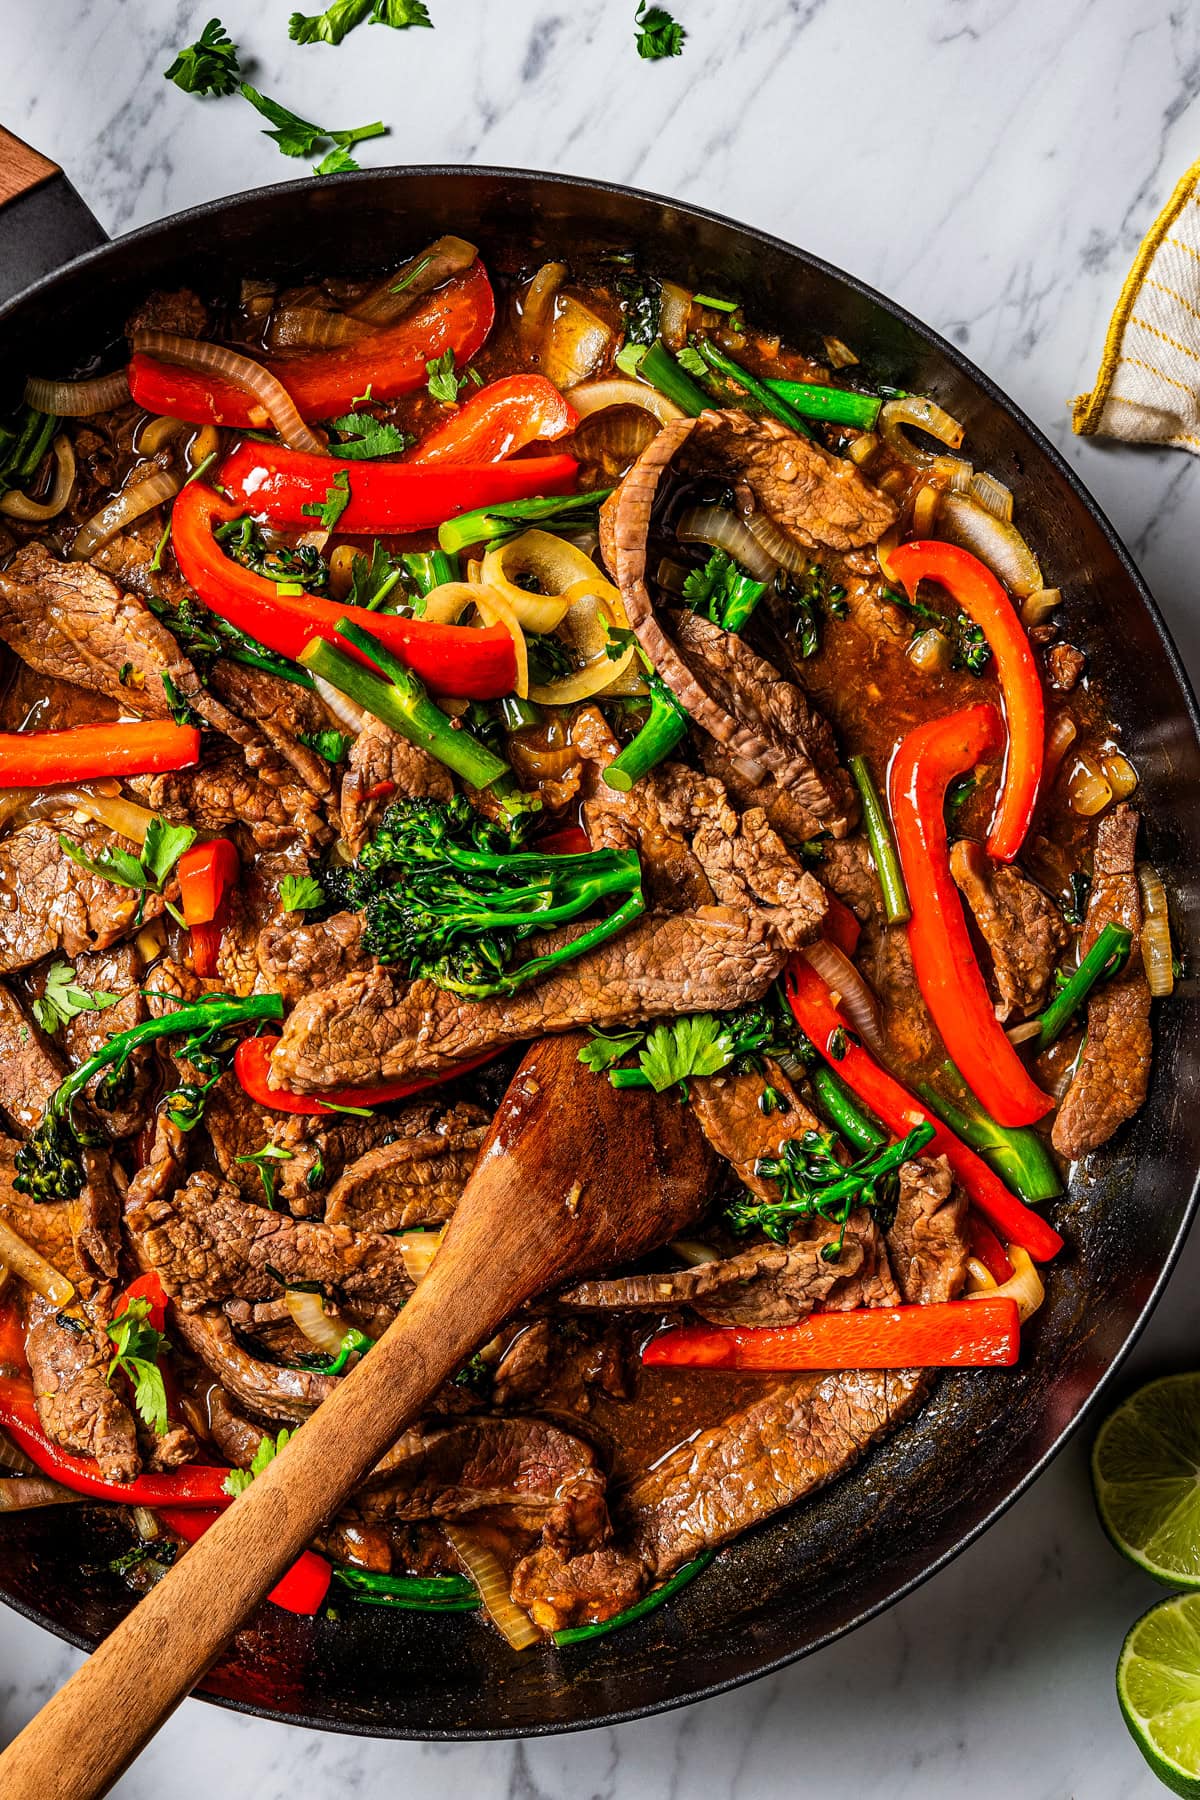 Image of Hunan beef in a skillet with a wooden spoon stirring through it.